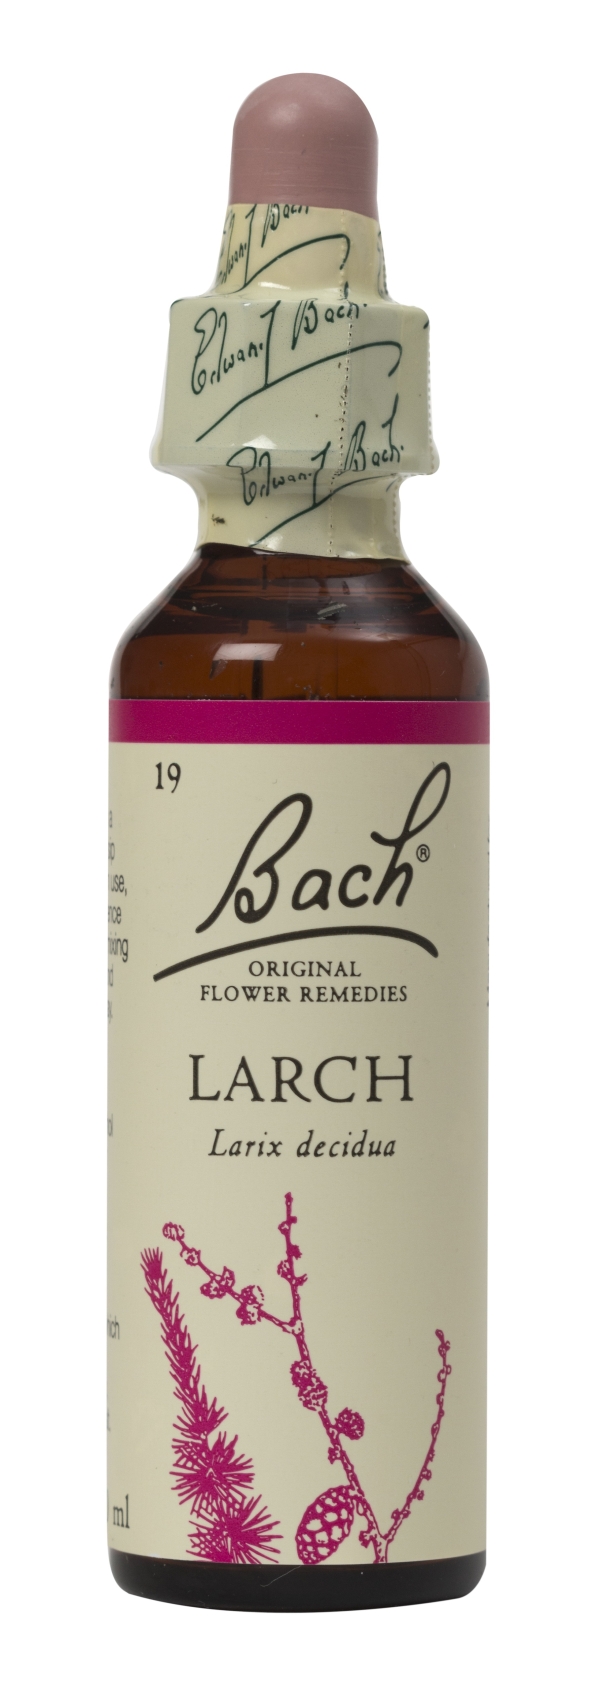 Nelson Bach Flower Remedies: Bach Larch Flower Remedy (20ml) available online here